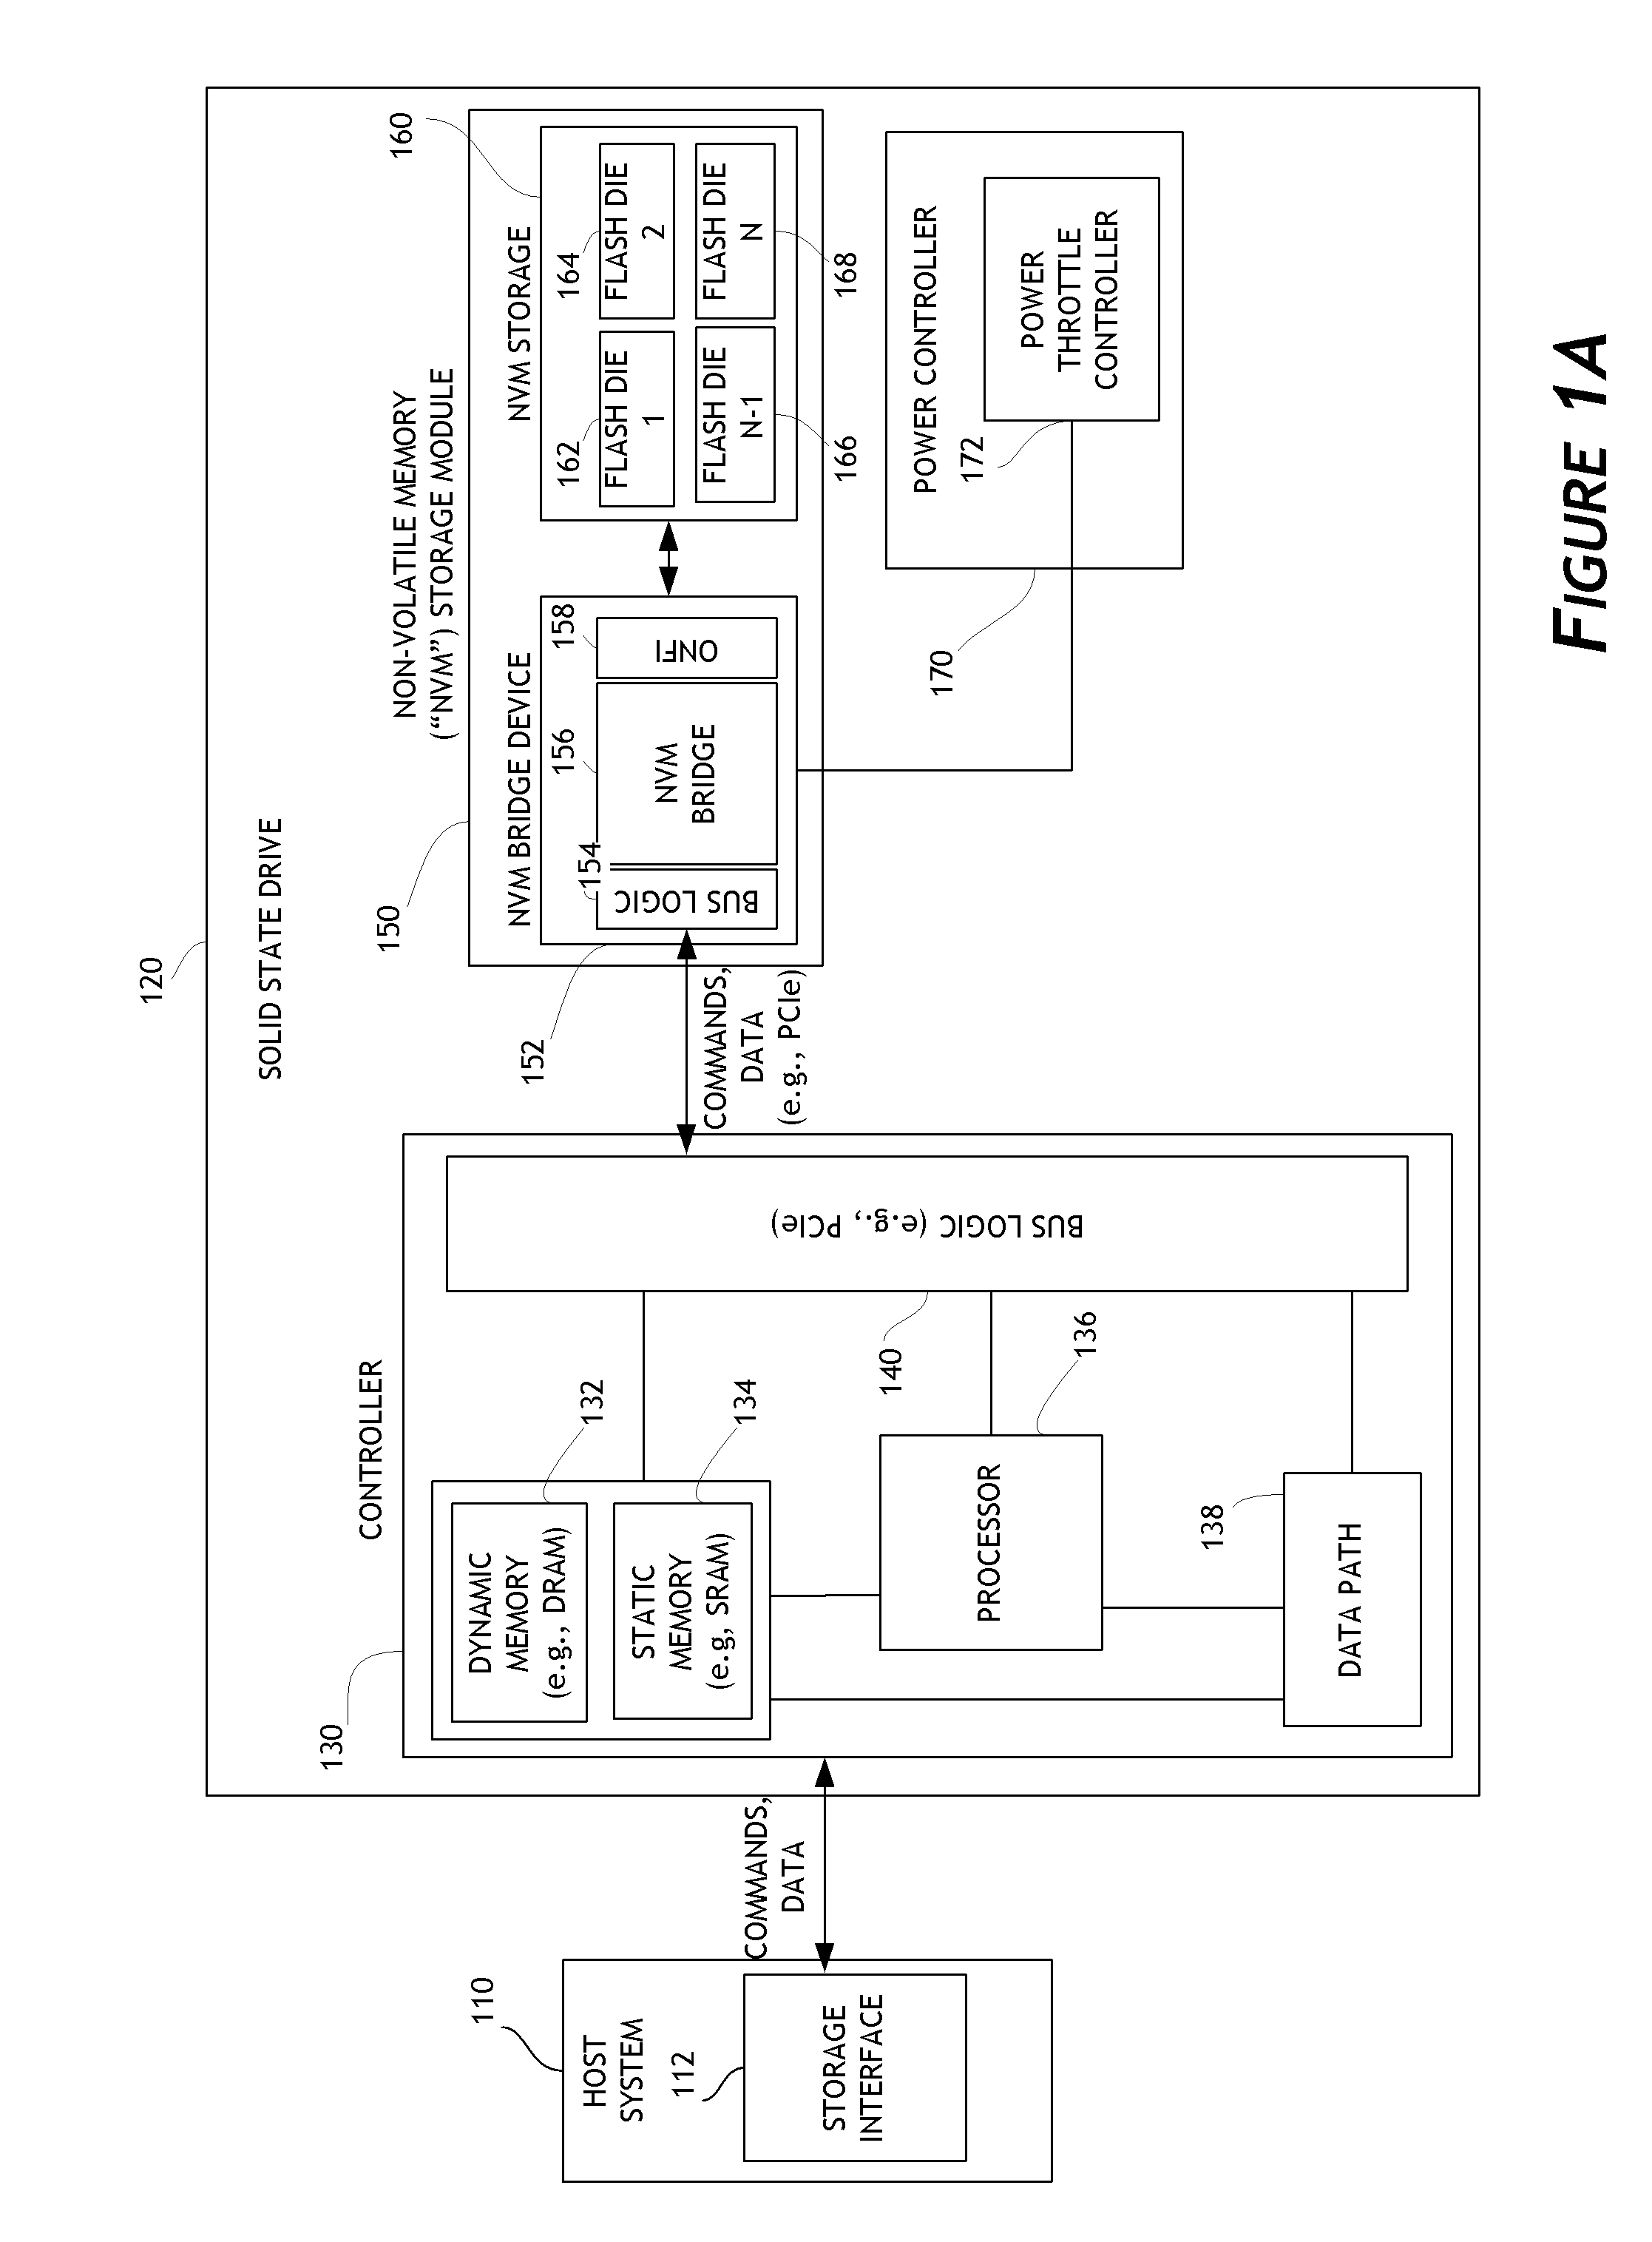 Systems and methods for detailed error reporting in data storage systems